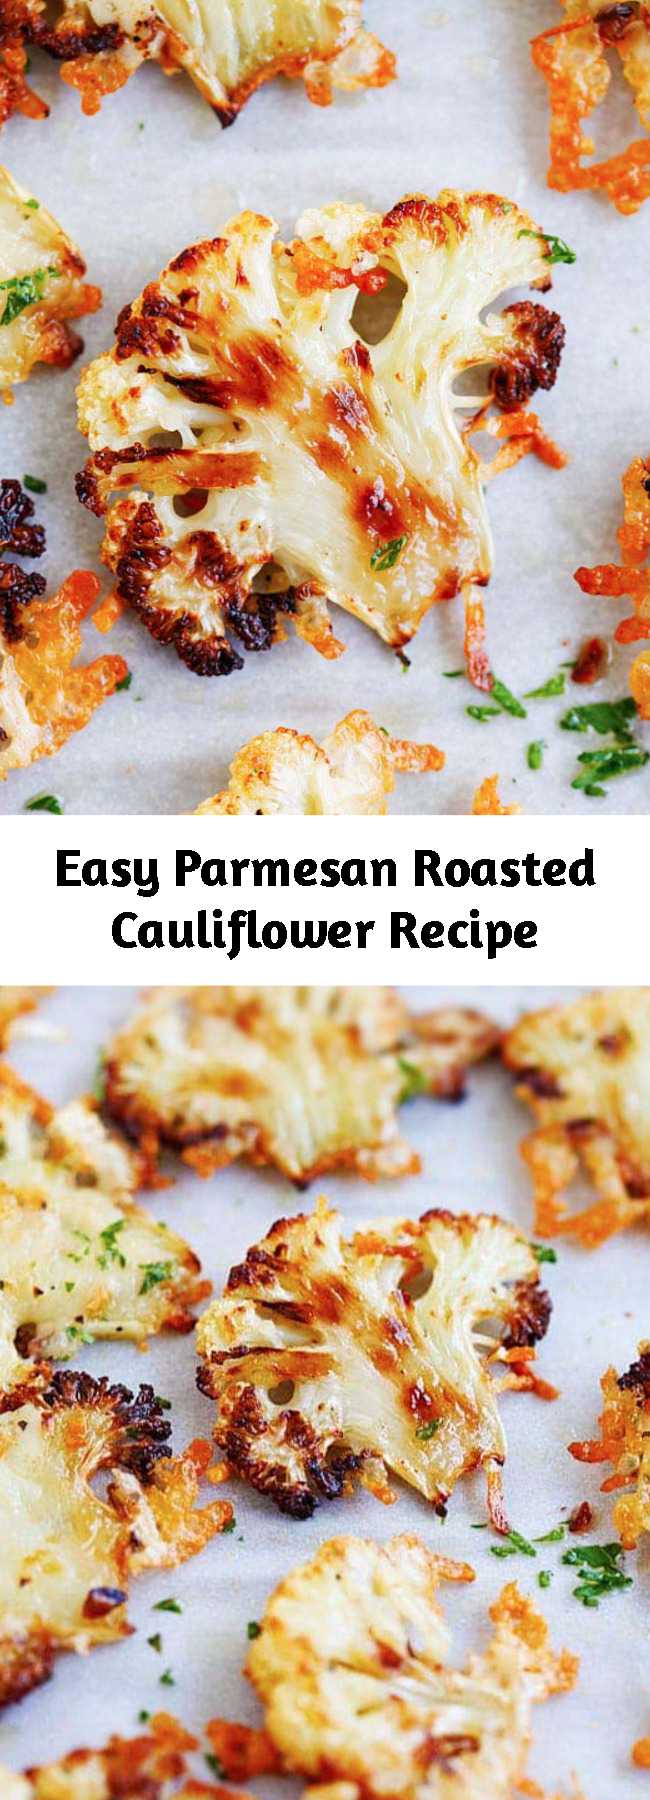 Easy Parmesan Roasted Cauliflower Recipe - Easy roasted cauliflower with Parmesan cheese is one of the best cauliflower recipes. Cauliflower is cheesy, buttery with simple ingredients. This recipe takes only 10 mins active time.